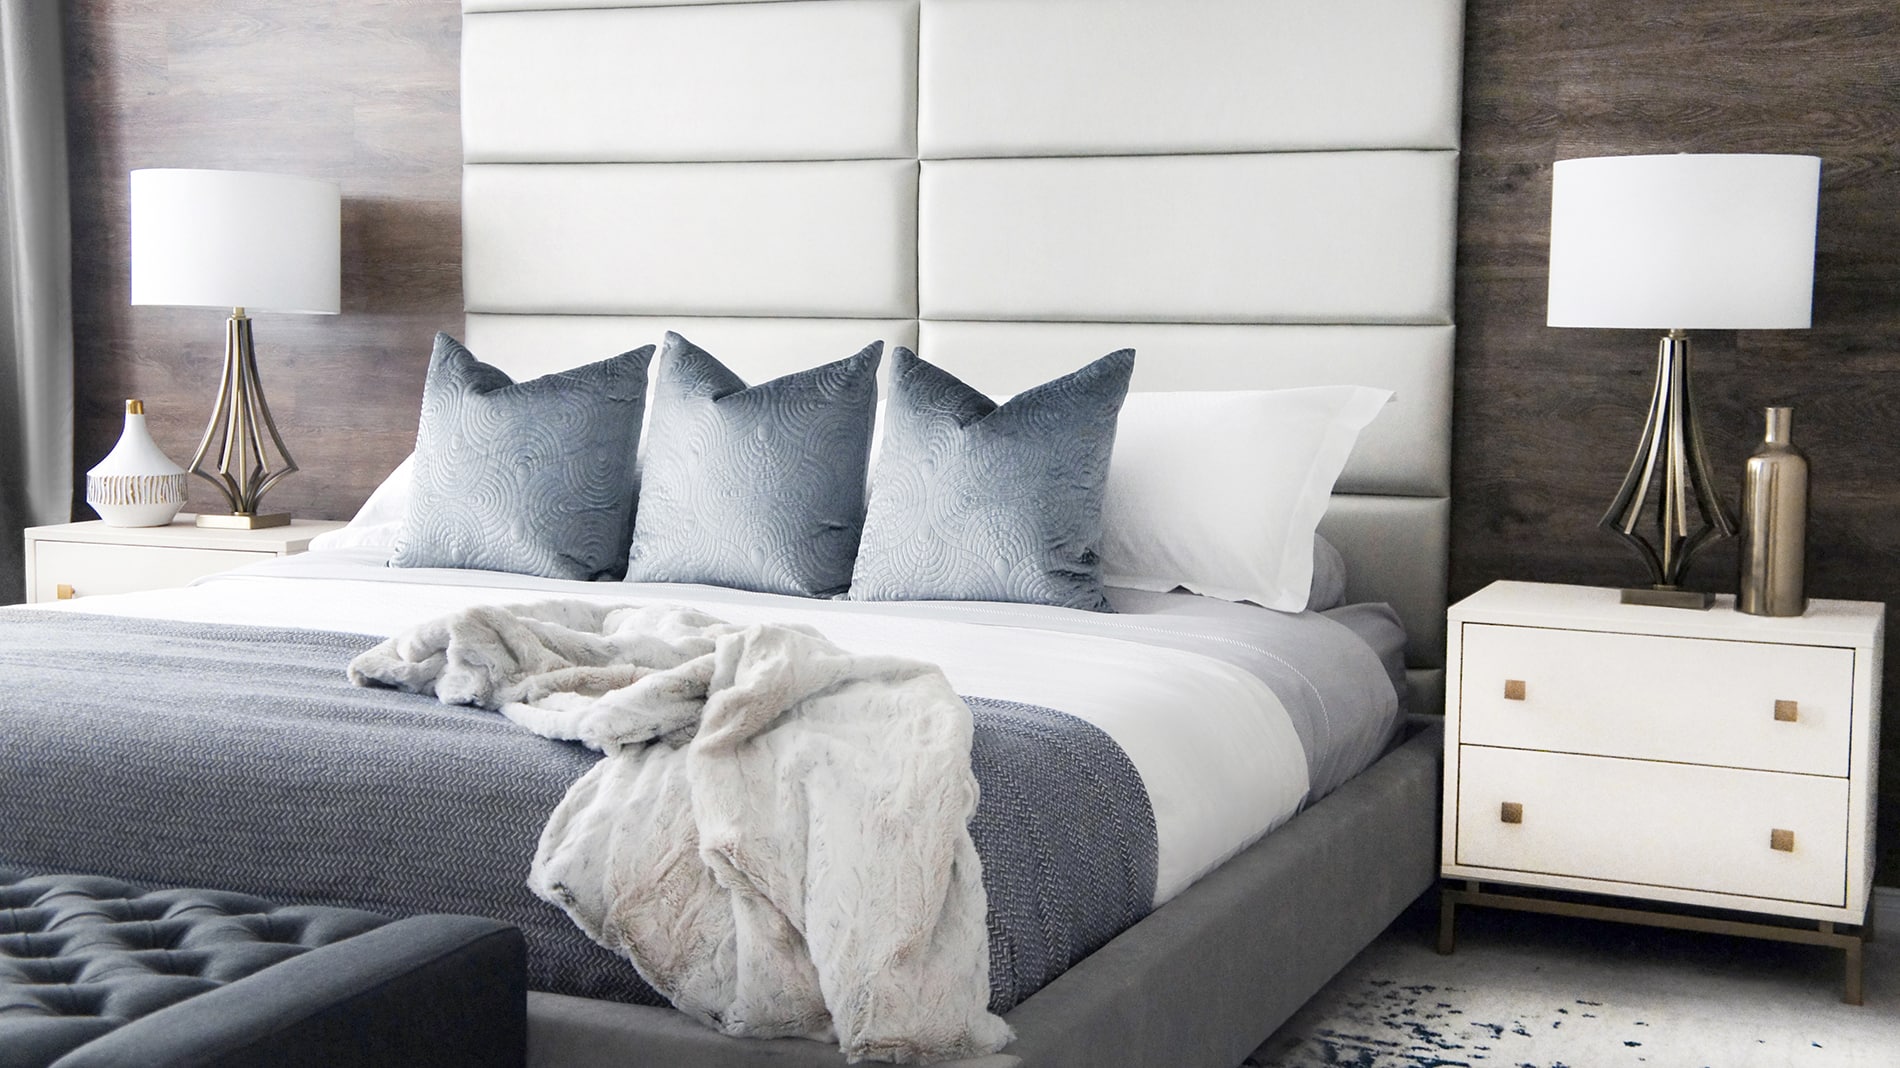 In the bedroom design of this Ajax home, the full-height headboard made of vant system panels is another example of a custom look created without spending a lot of money